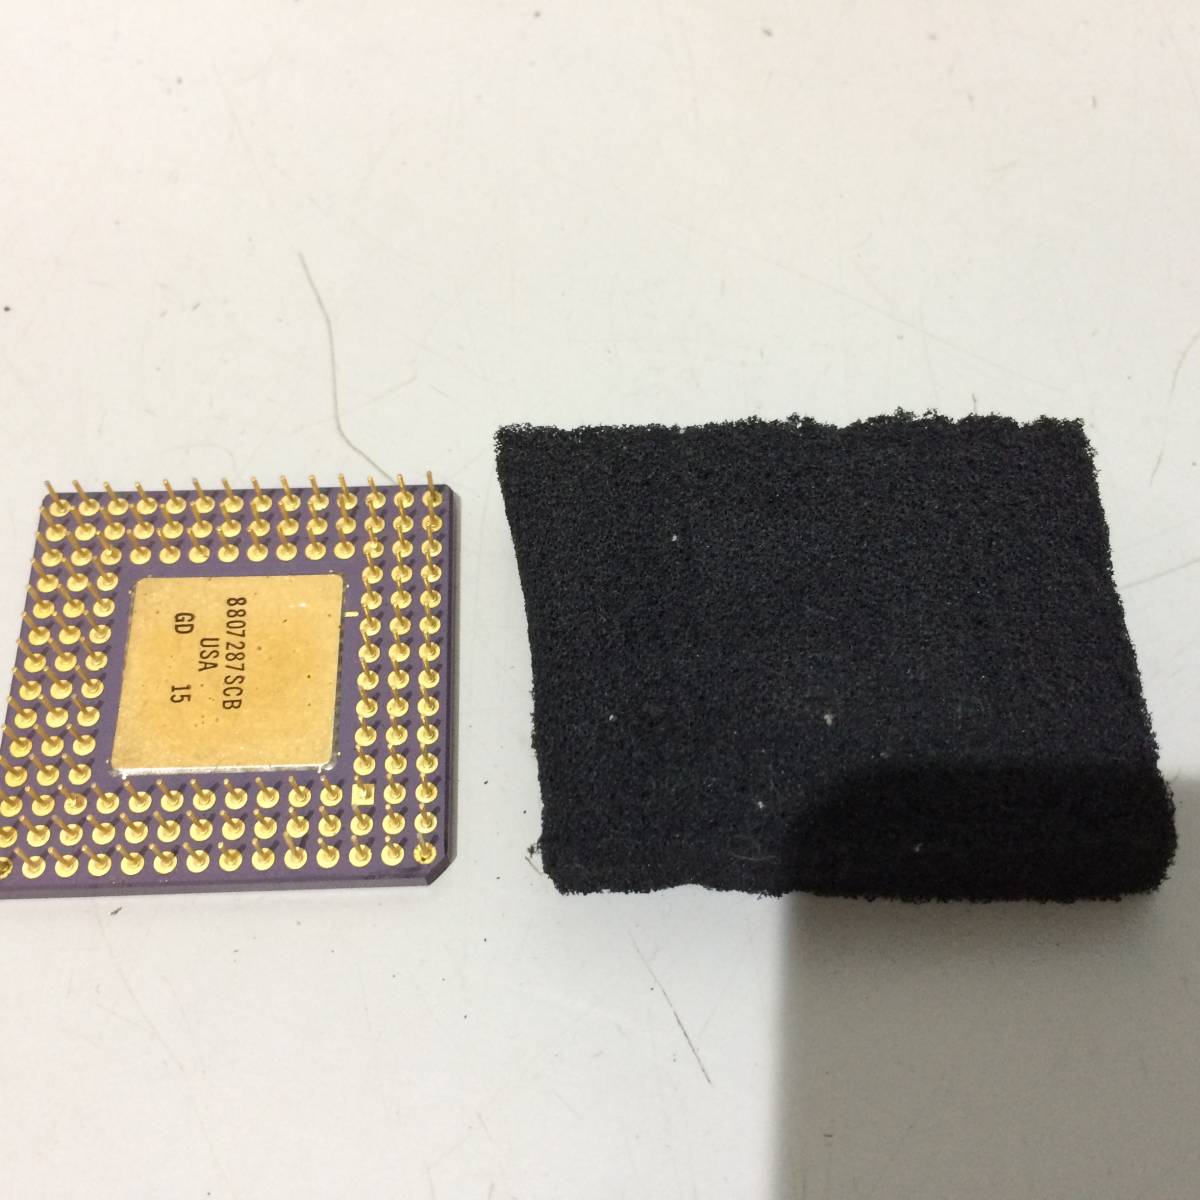  secondhand goods intel A80386-16 16MHz present condition goods ⑤